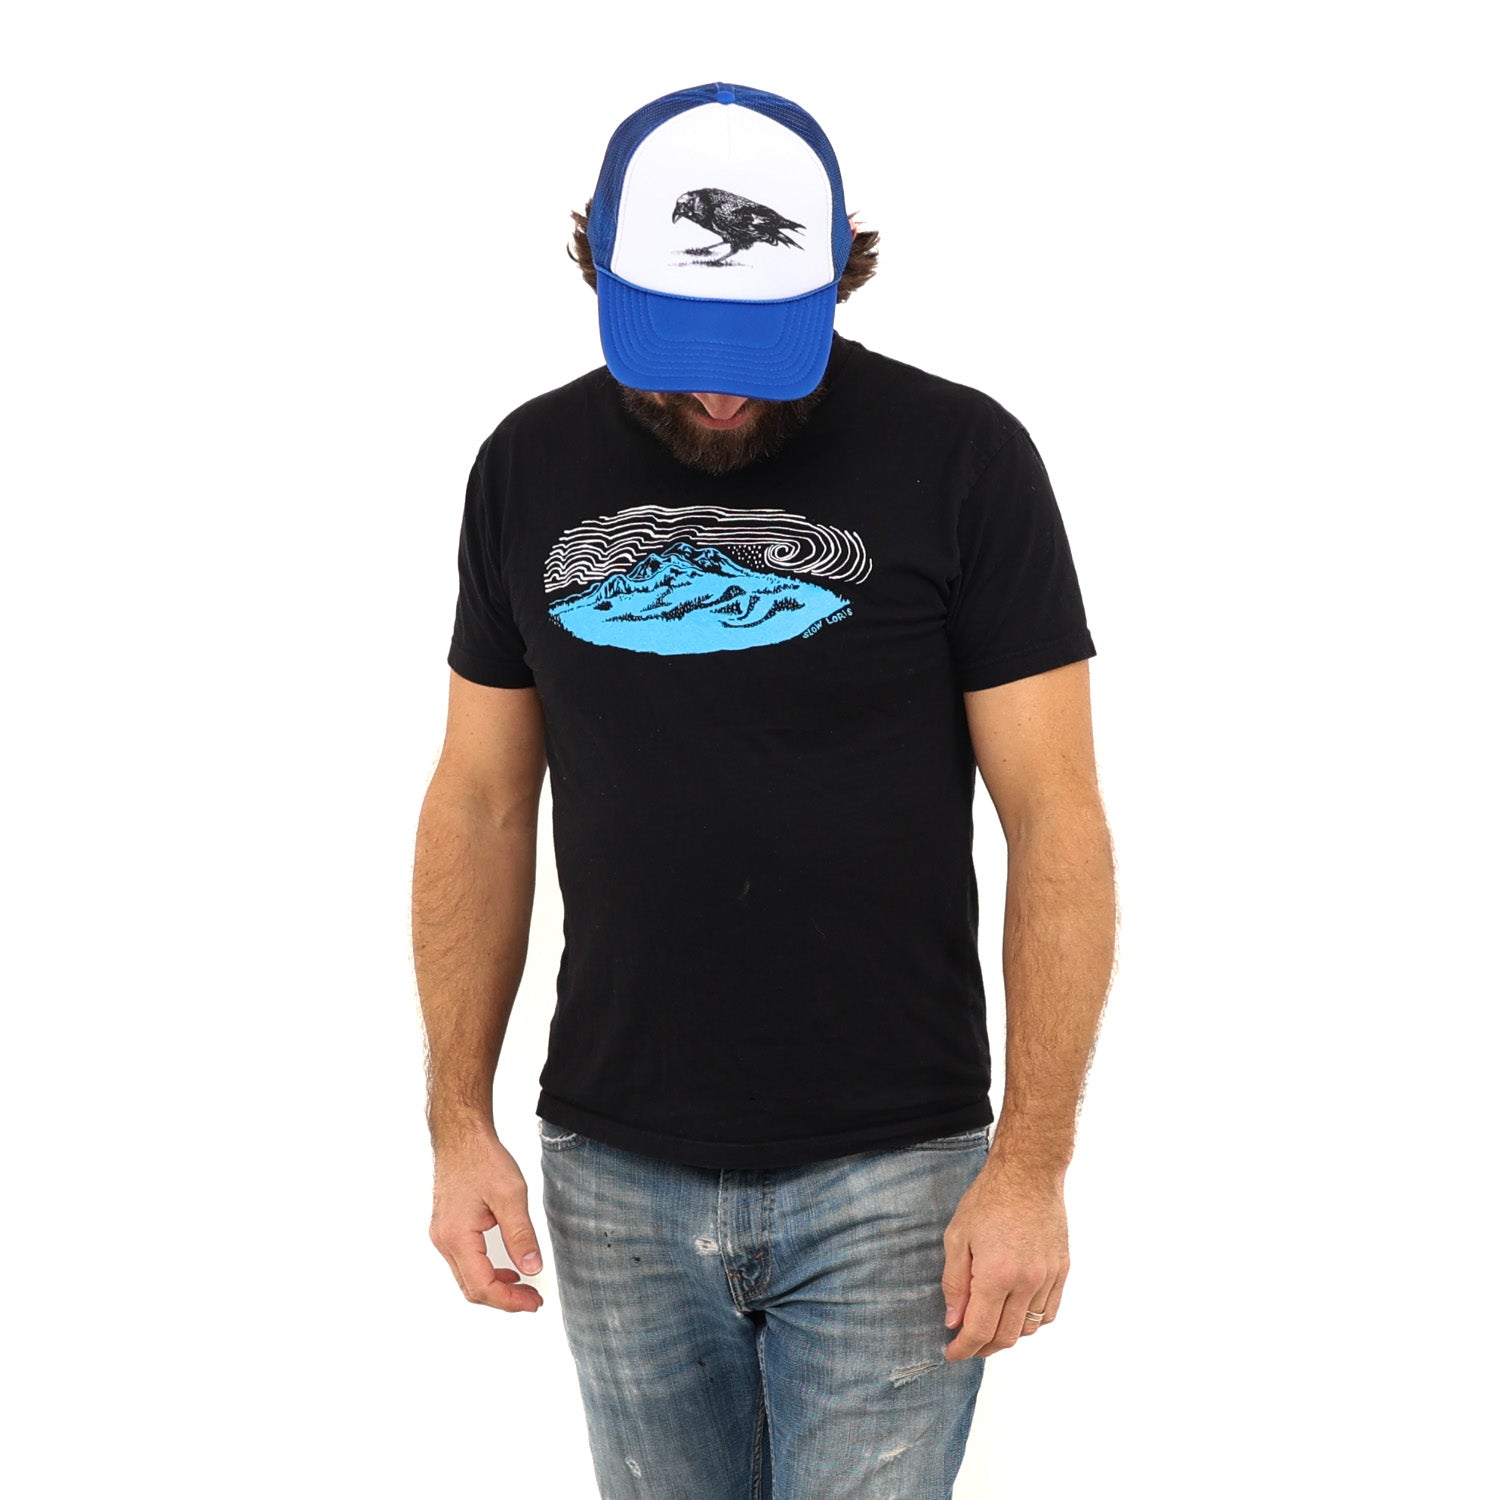 Man looking down wearing a ball cap in blue jeans and a black t-shirt with a blue mountain and white wind lines screenprinted 